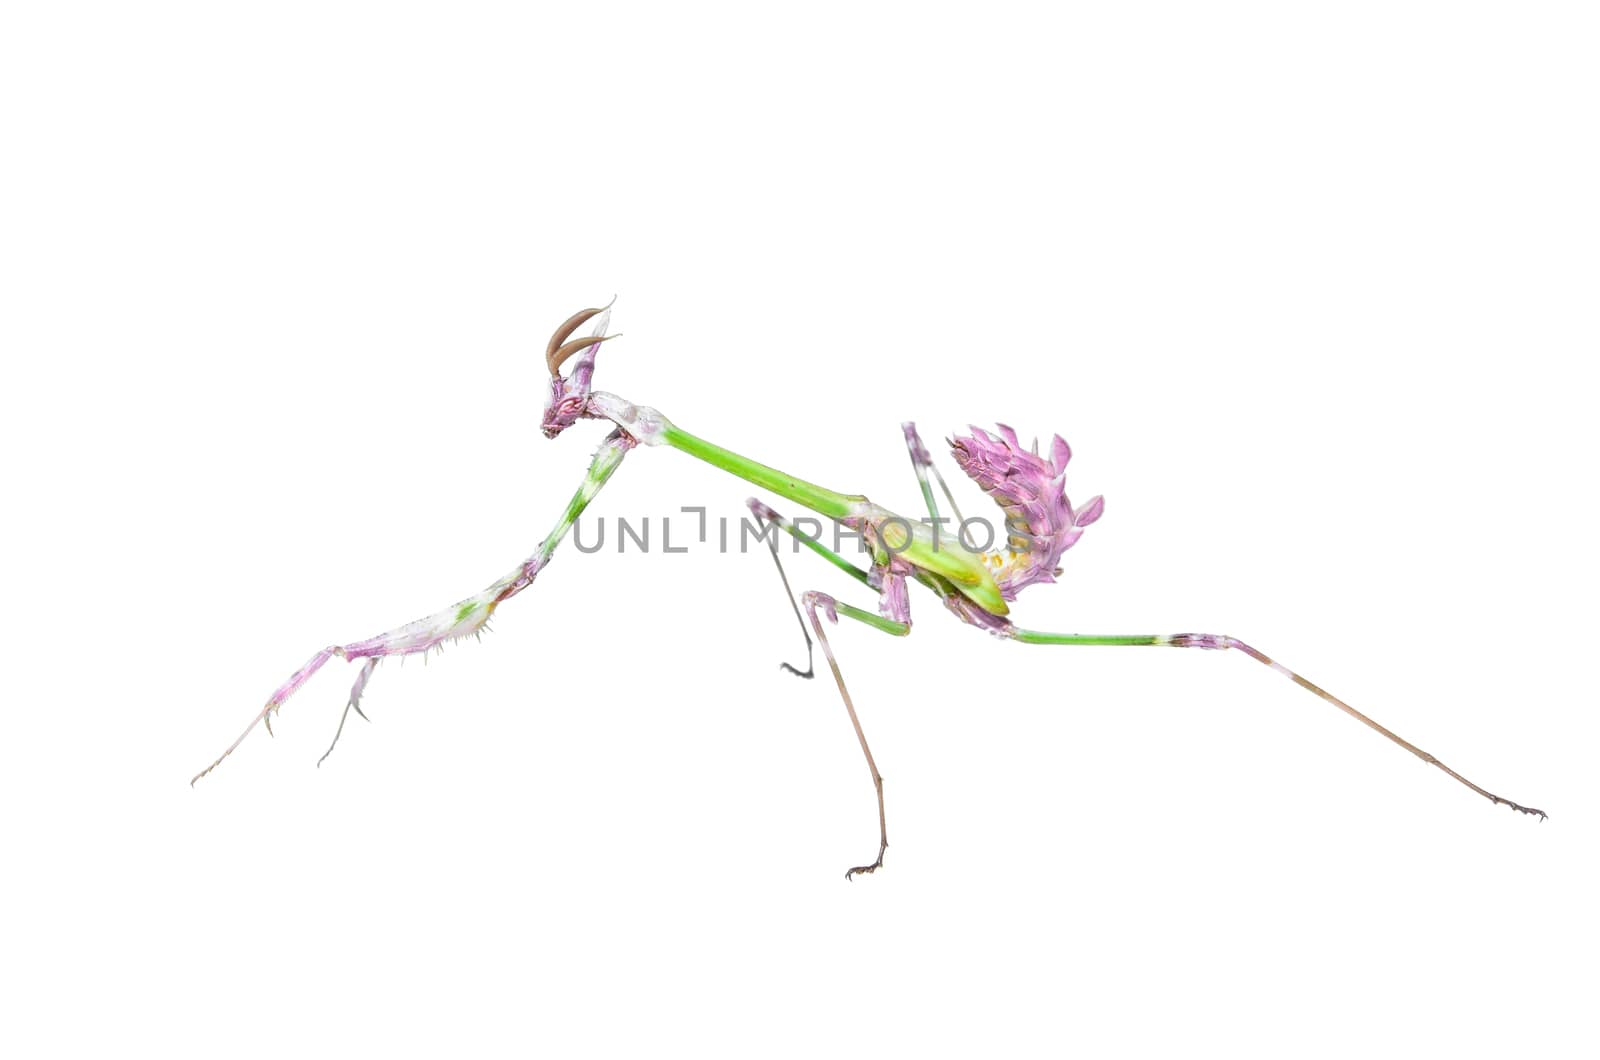 Mantis raptor with long spiked forelegs in attack pose catches prey isolated